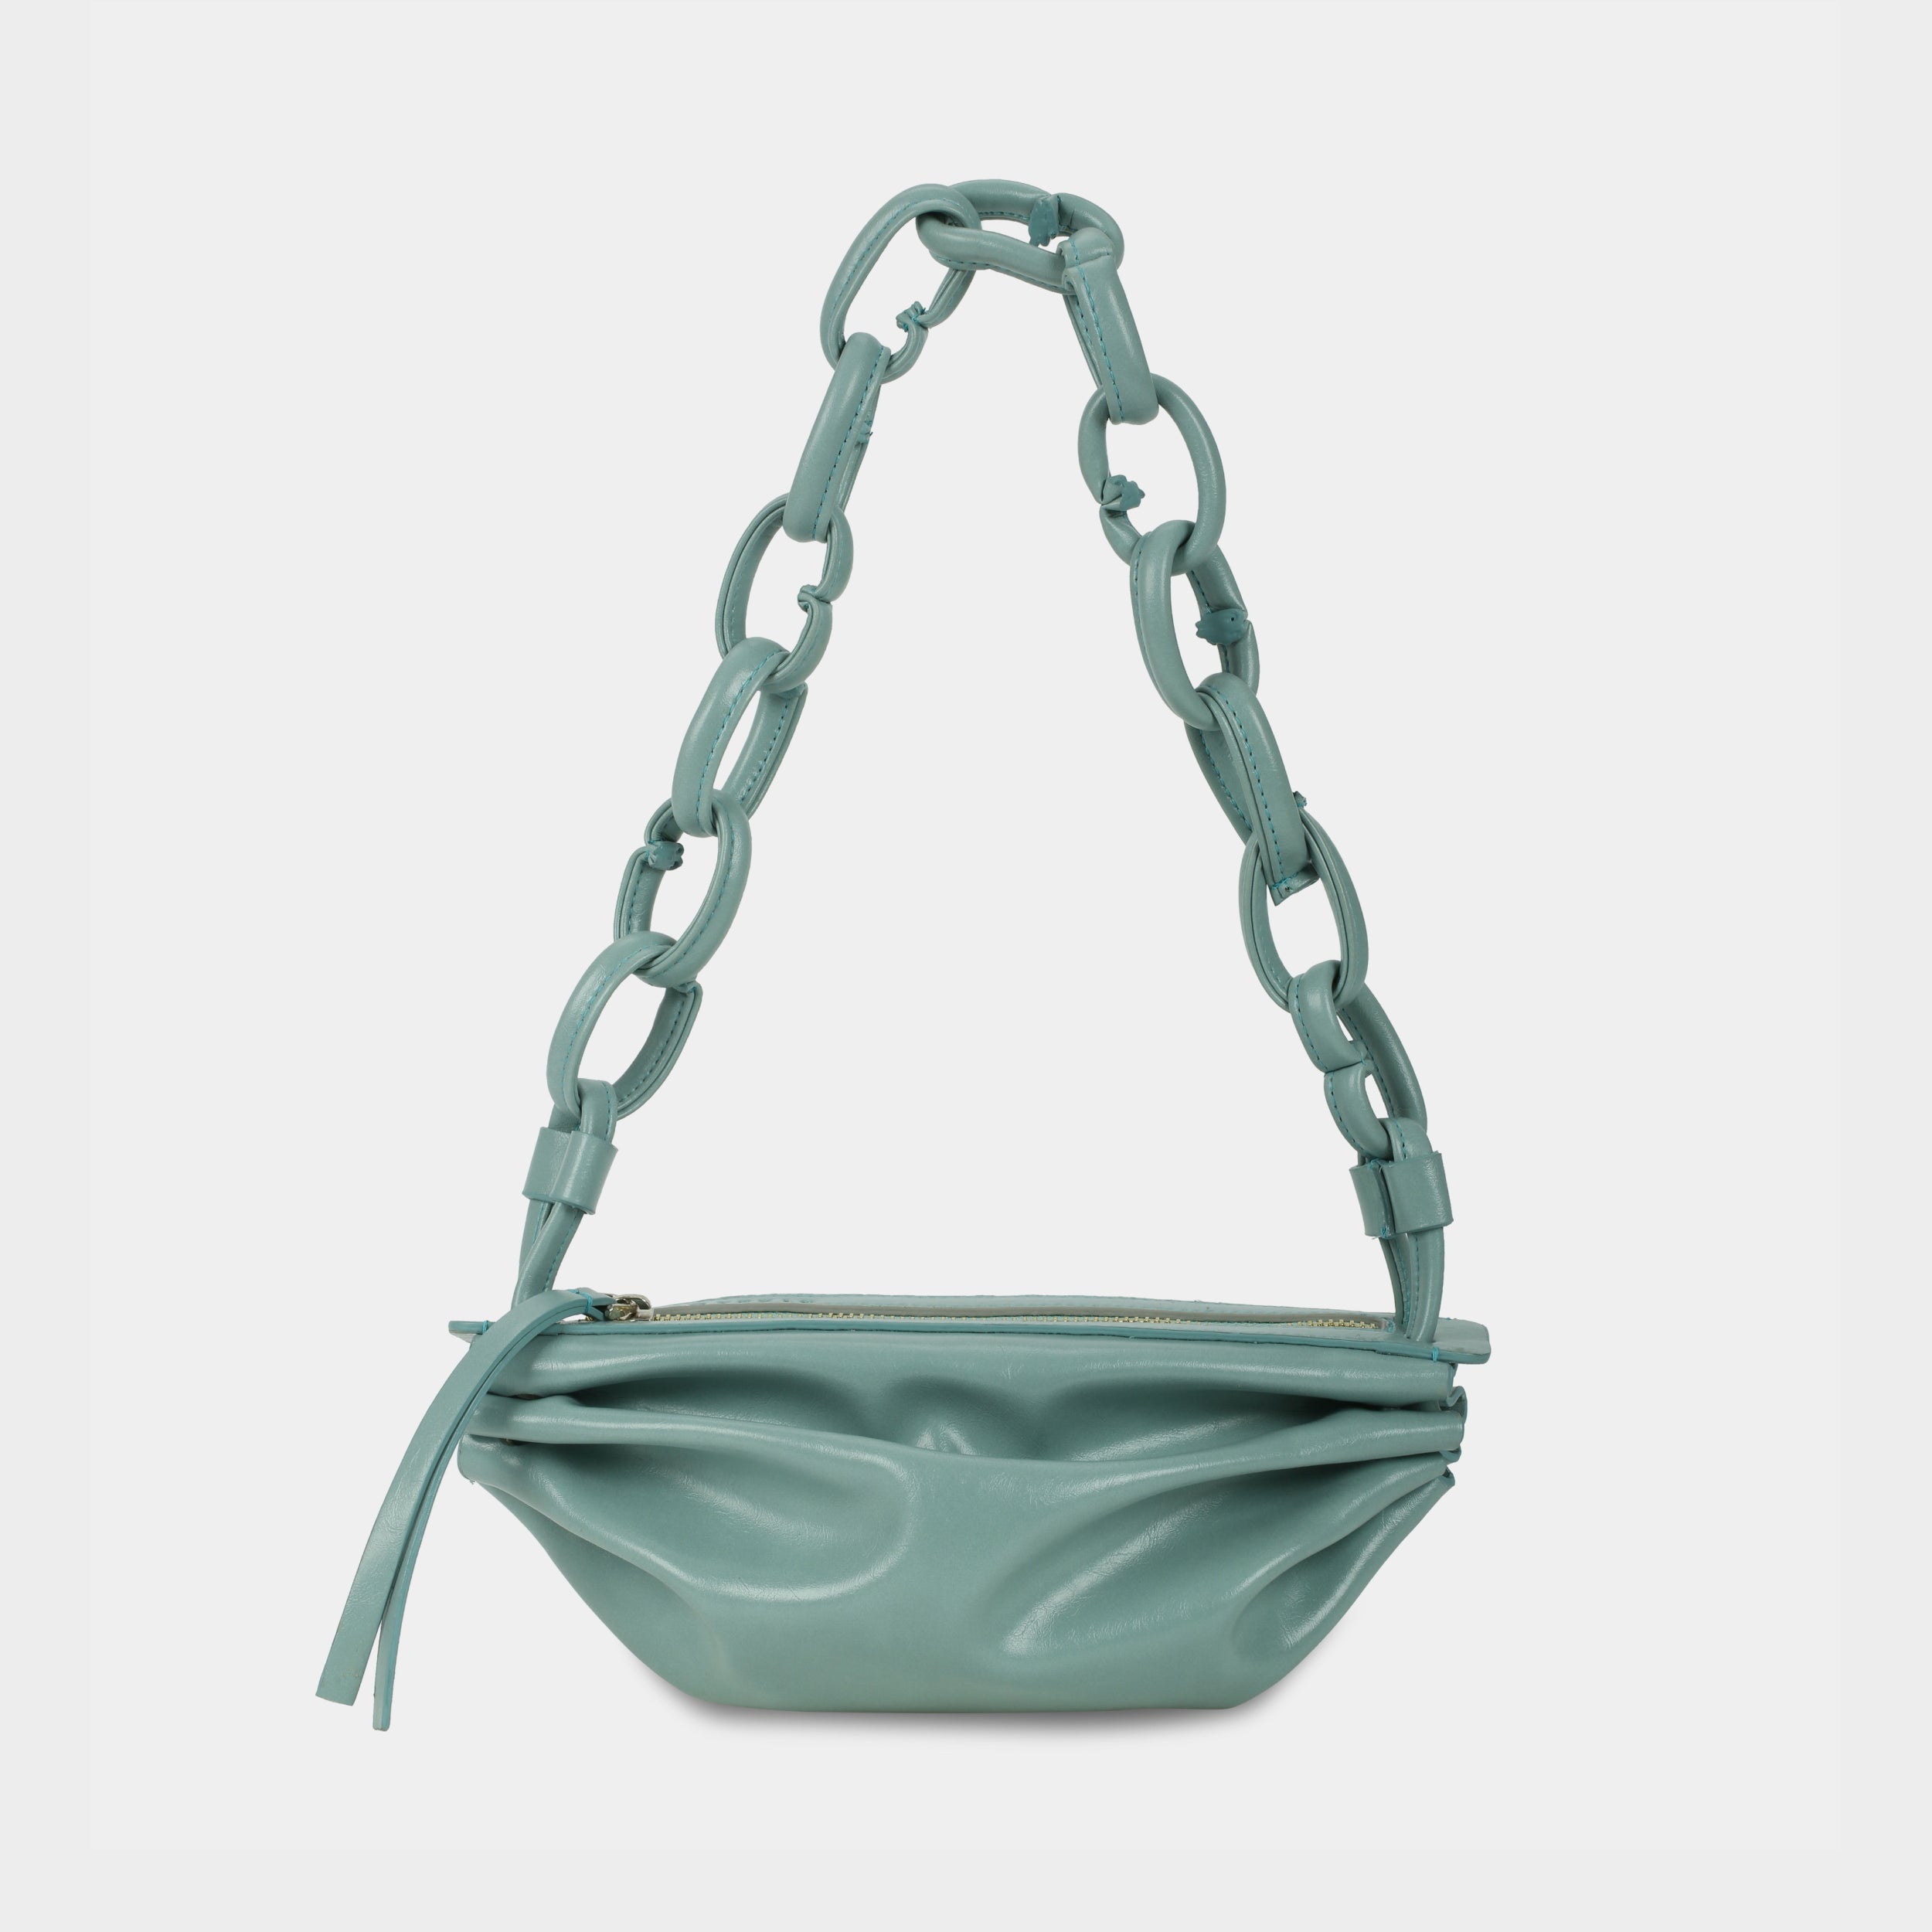 BOAT bag small size (S) pastel turquoise